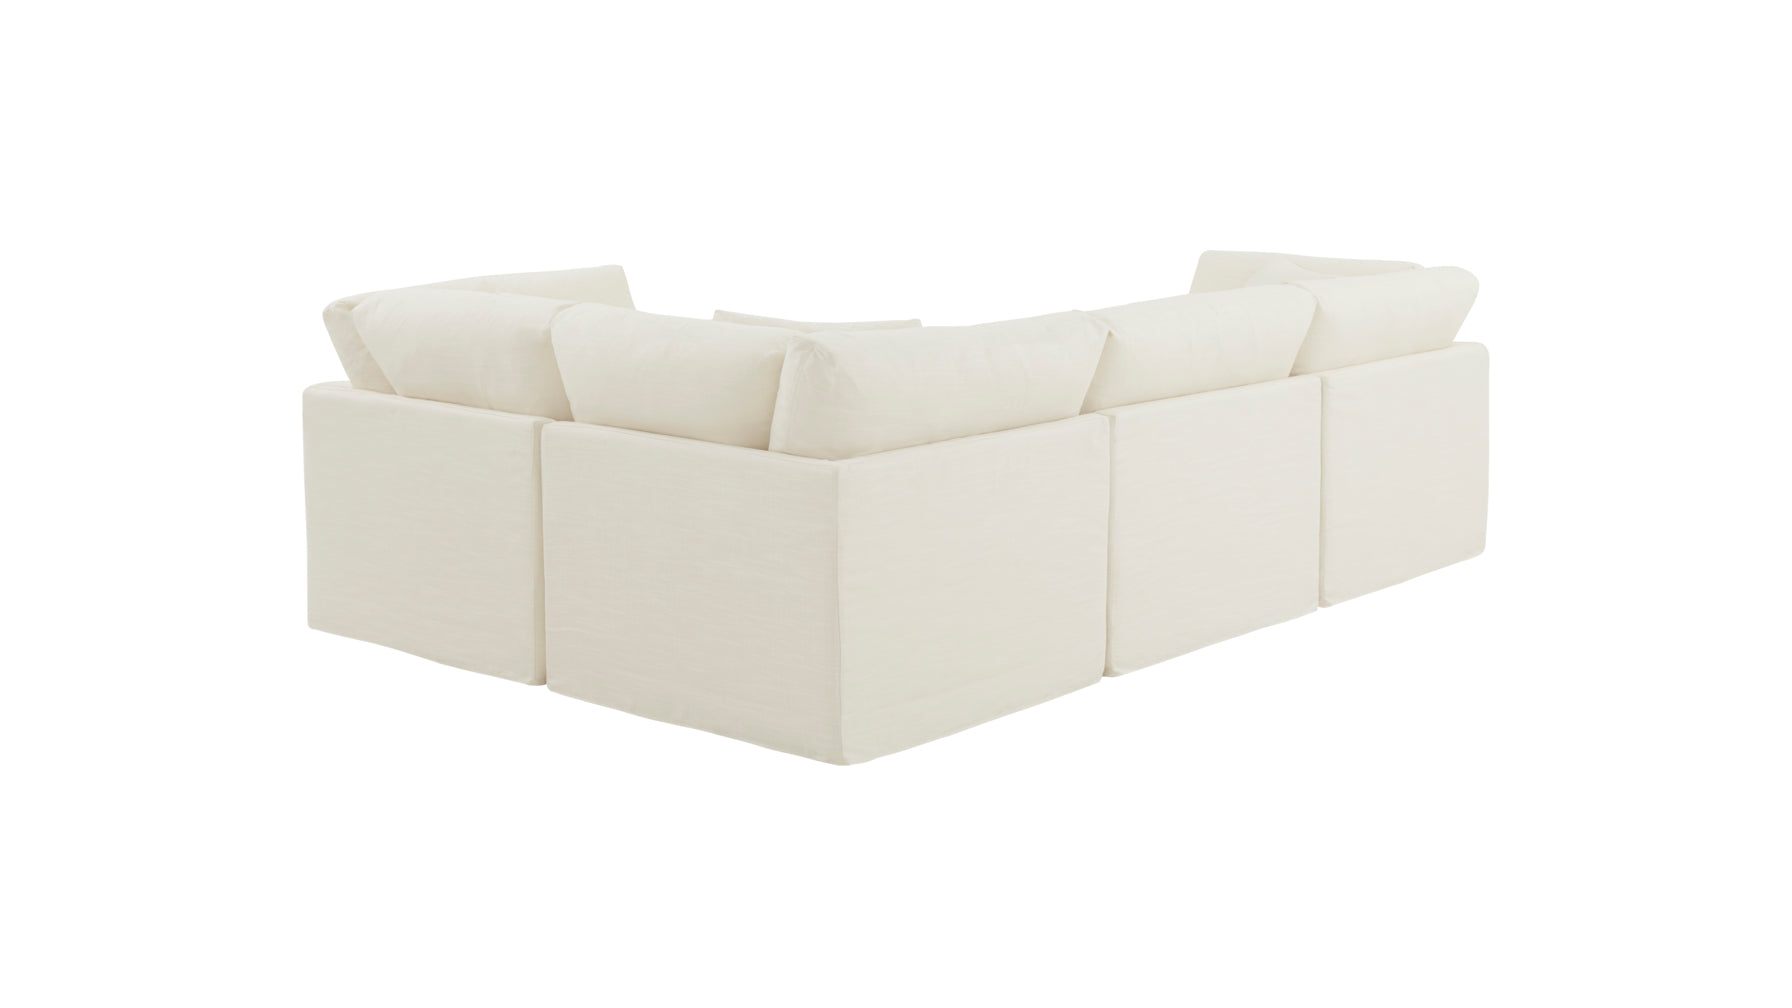 Get Together™ 4-Piece Modular Sectional Closed, Standard, Cream Linen - Image 7